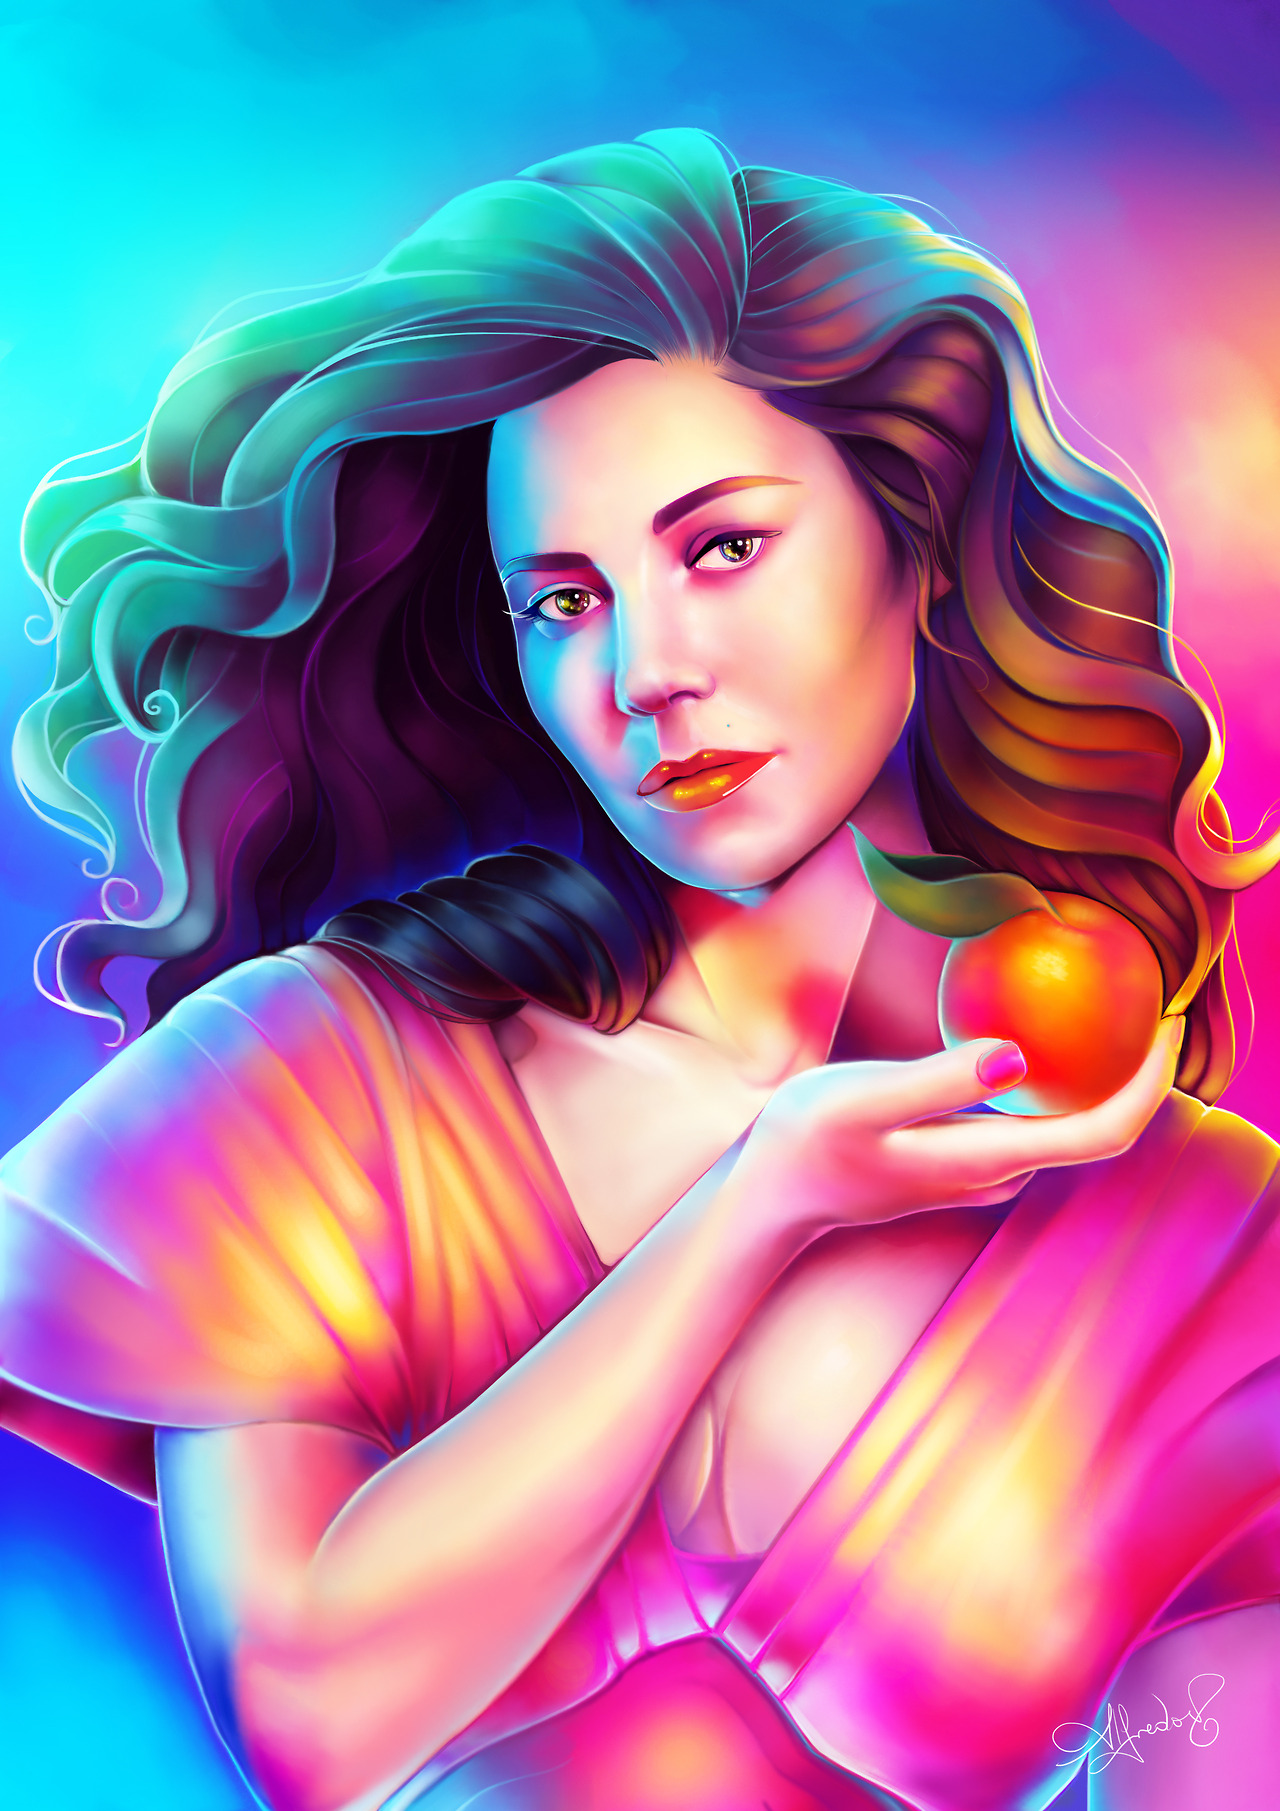 froot marina and the diamonds m4a